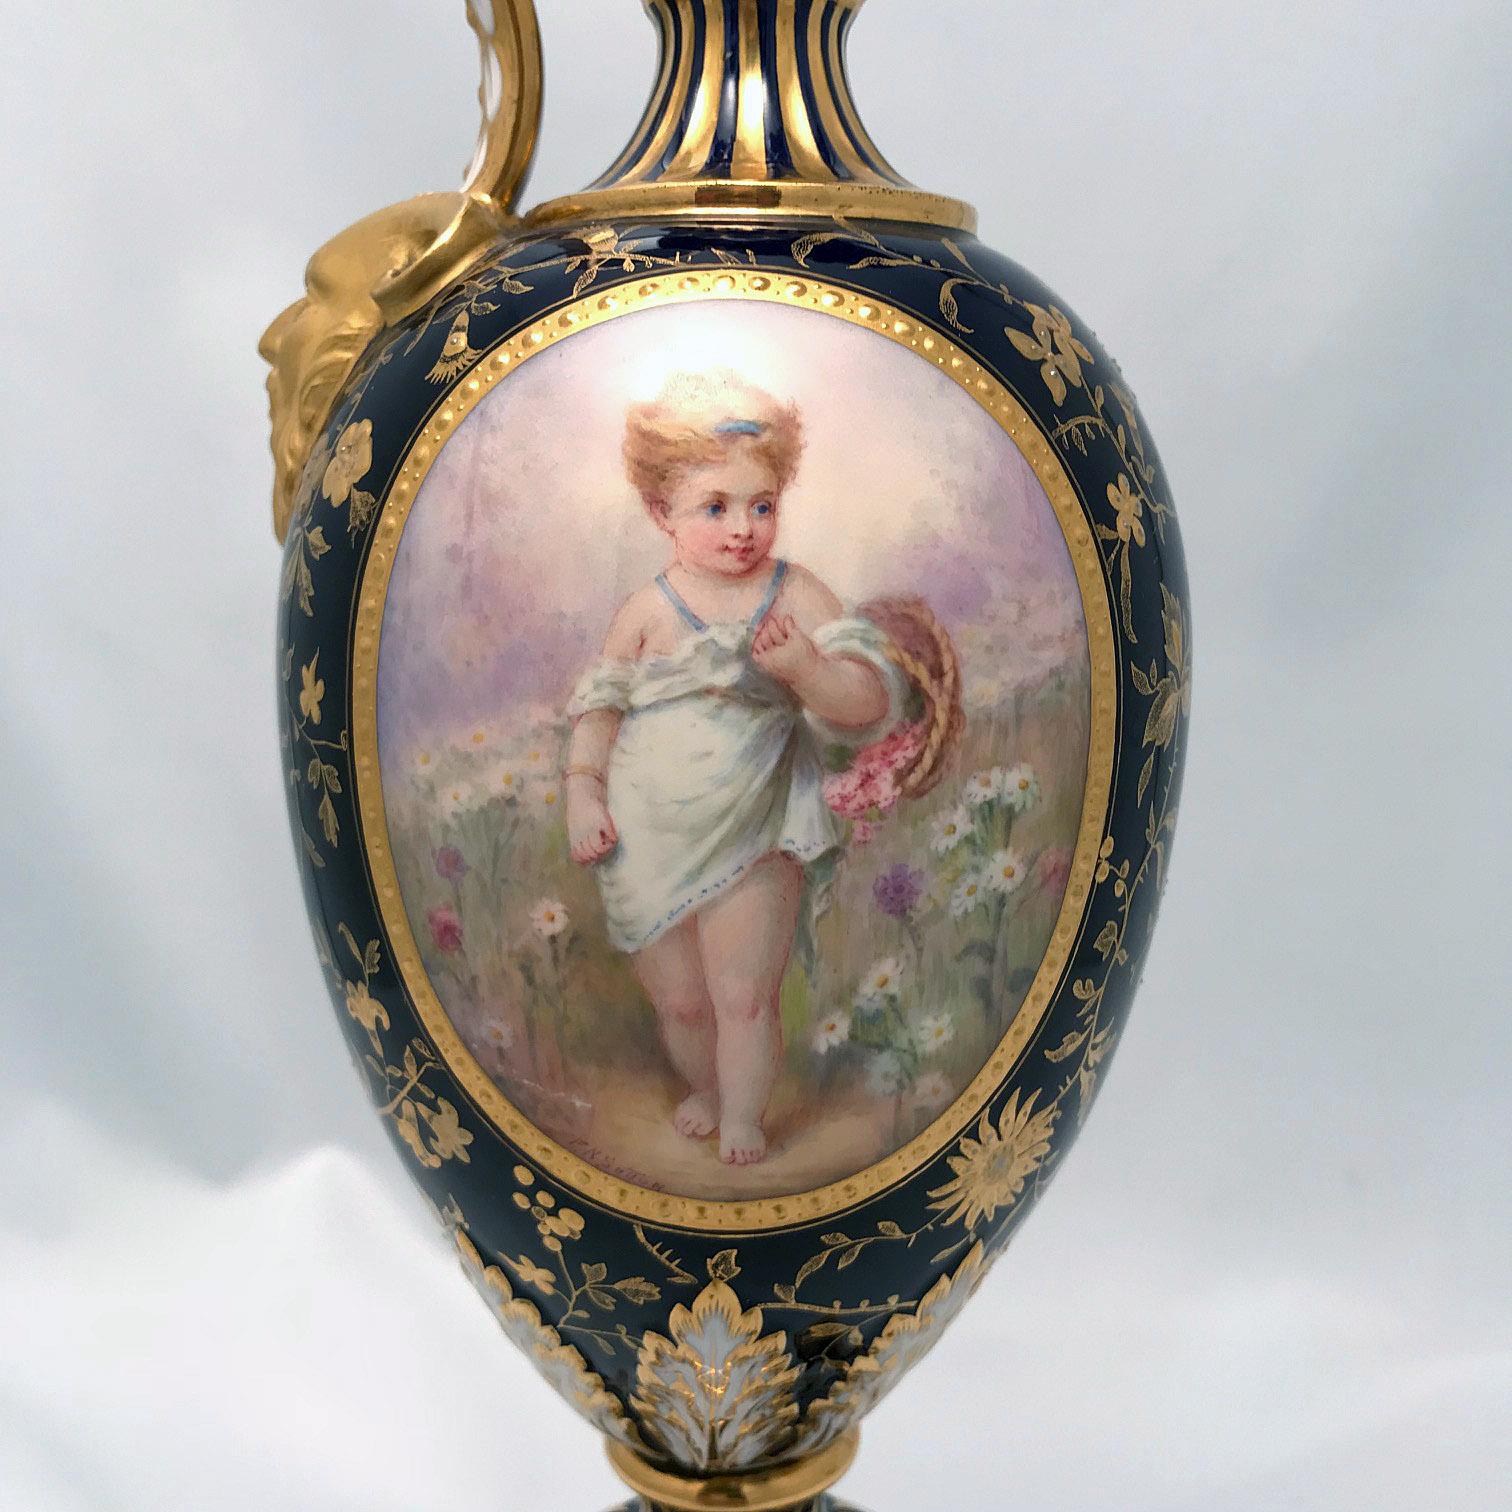 This is surely among Minton's best work this elegant jug is in cobalt blue, sumptuously gilt with trailing leaves, and a mask, jeweled at the neck, and on a square gilt base. The oval reserve is charmingly painted with a little girl in a garden. No